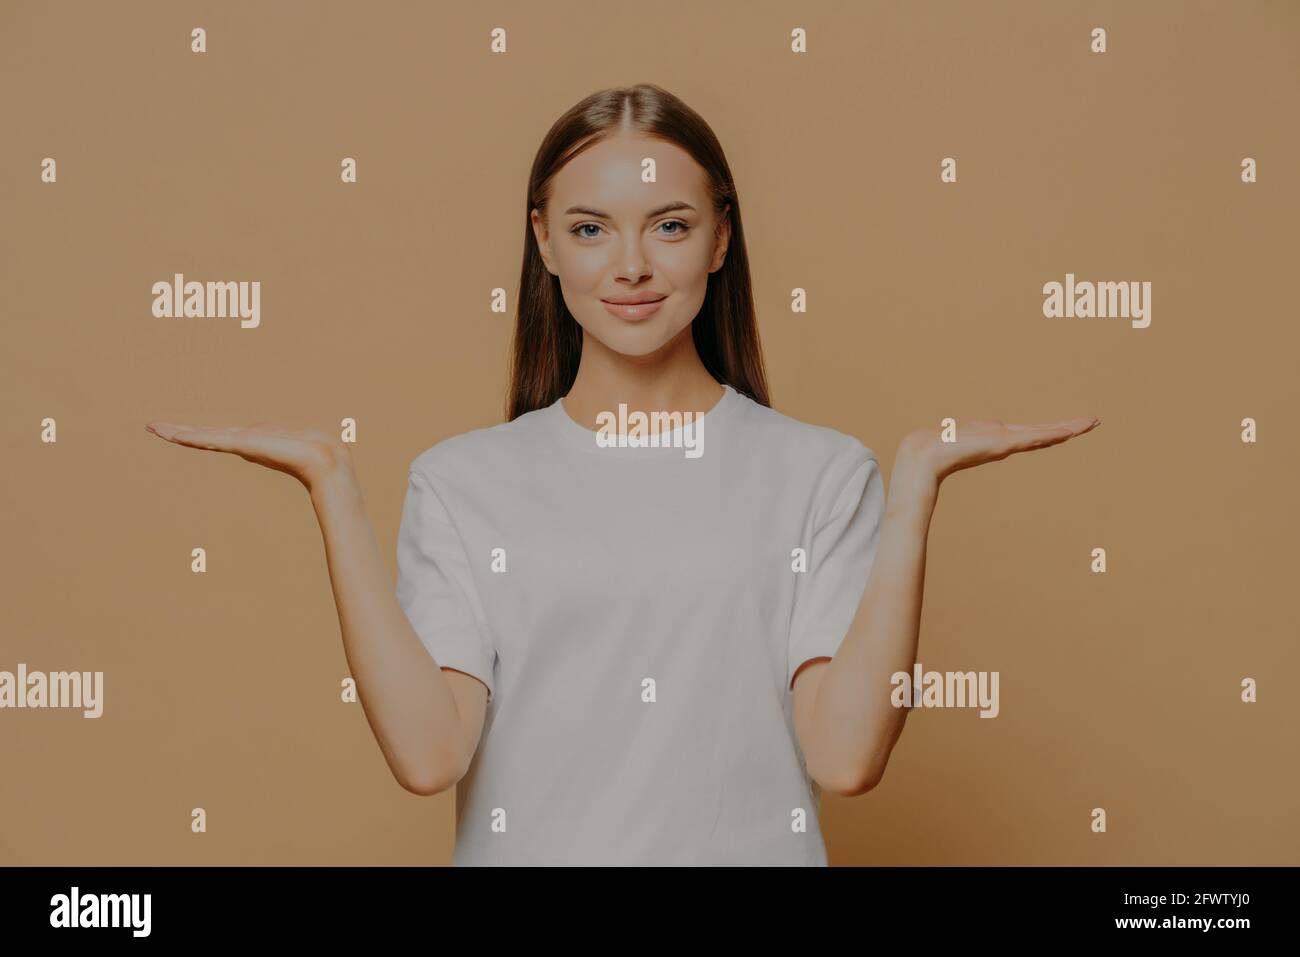 Woman raises palms pretends holding something over blank copy space against brown background wears casual white t shirt proposes product Stock Photo